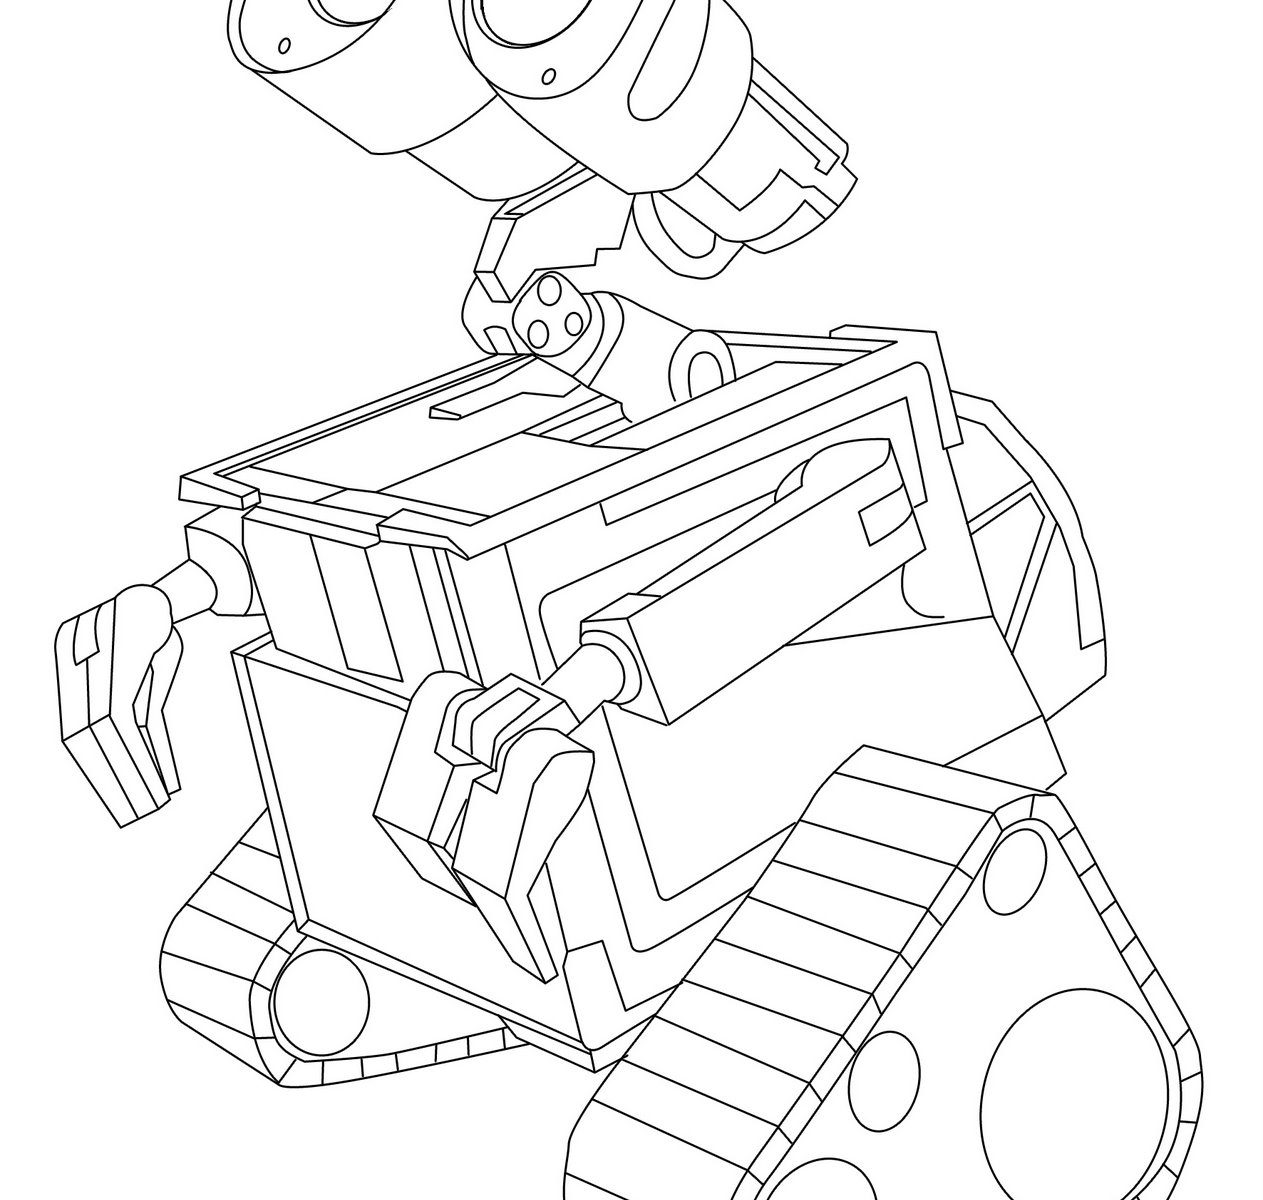 Wall E And Eve Coloring Pages at GetDrawings | Free download